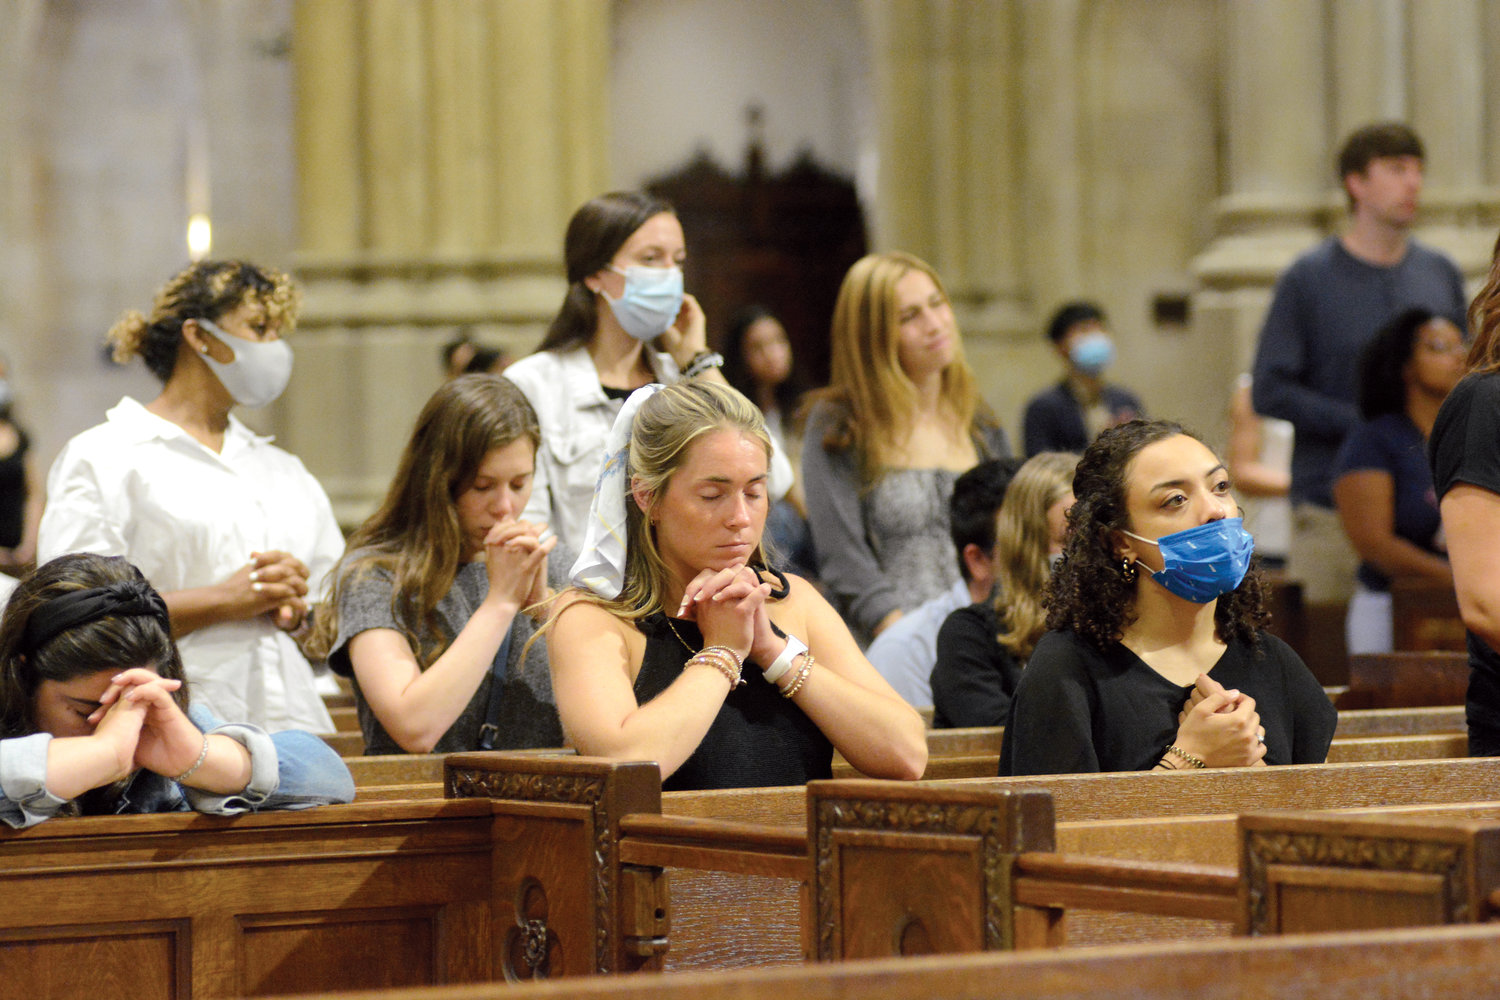 PRAYING PEACEFULLY—This serene scene was captured at the monthly Young Adult Mass at St. Patrick’s Cathedral in August. Cardinal Dolan will offer the next such Mass, on the feast of the Immaculate Conception, Wednesday, Dec. 8, at 7:30 p.m.